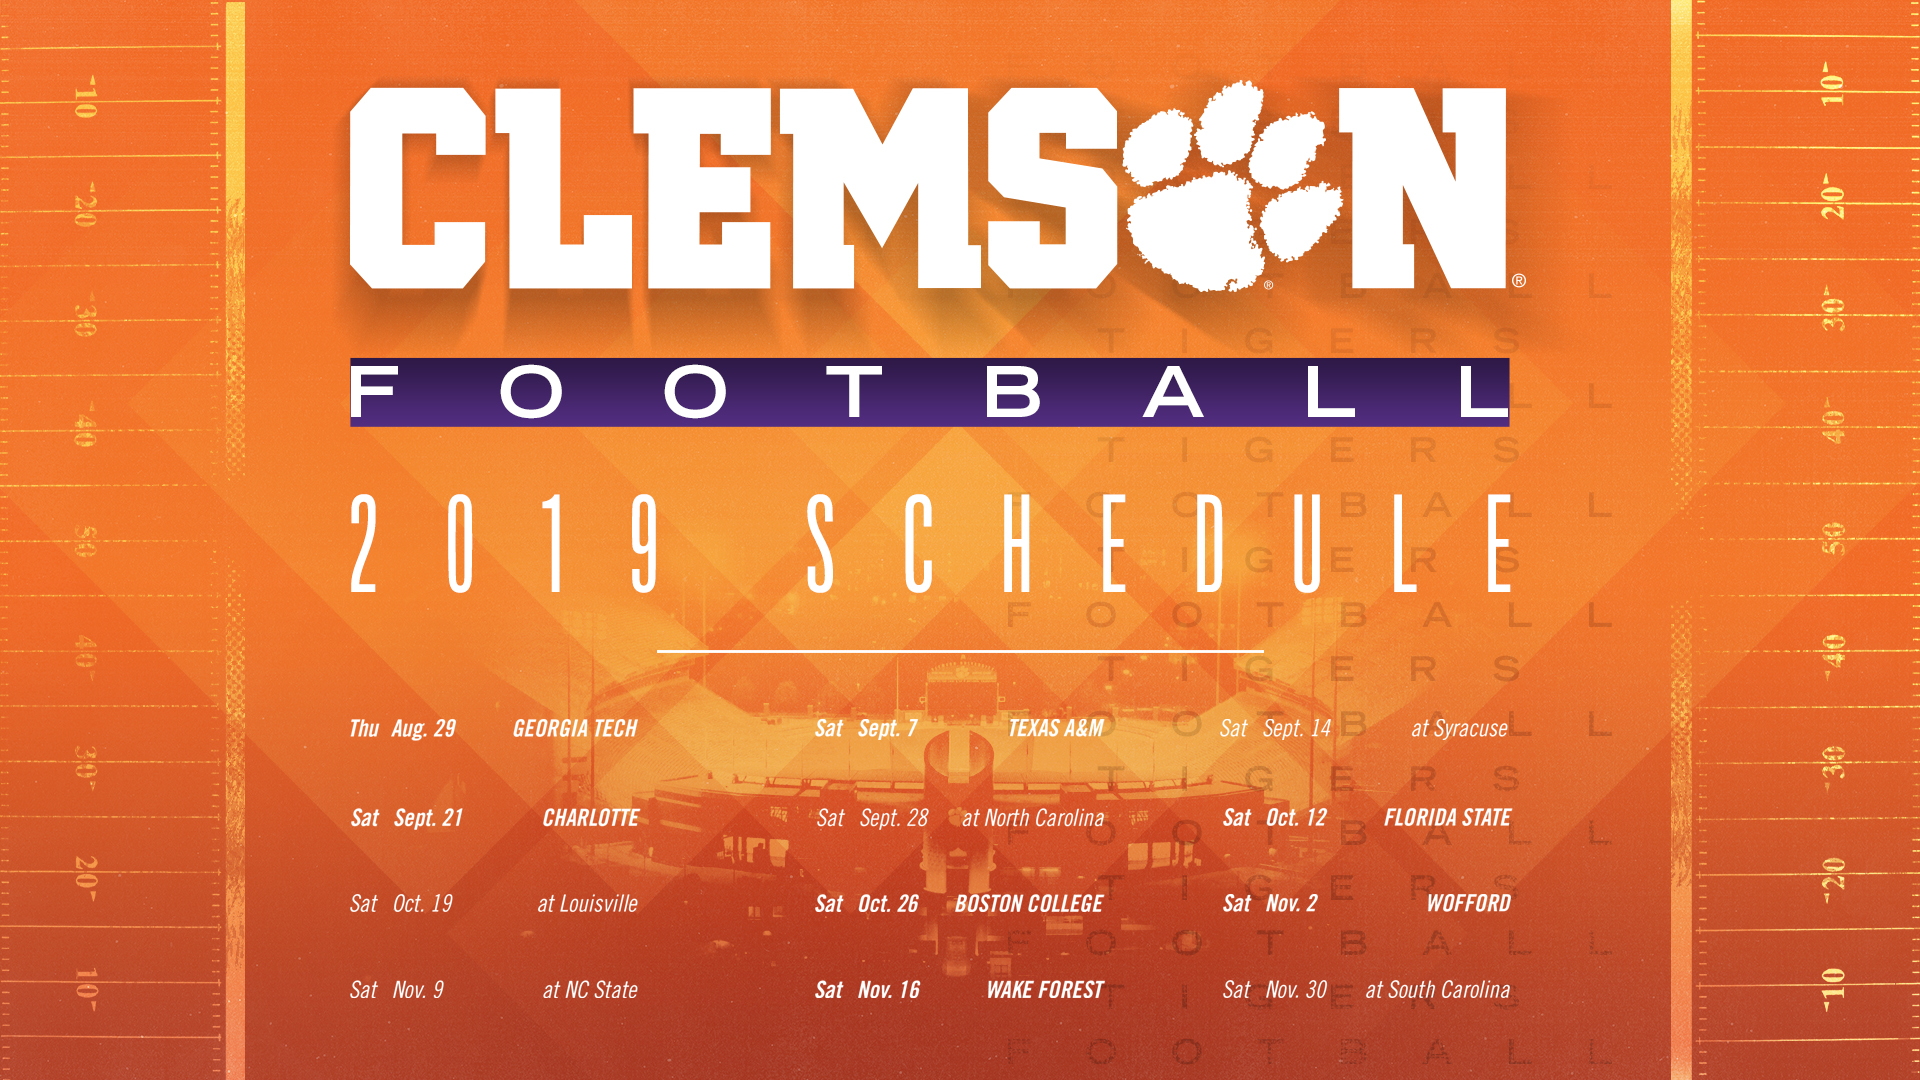 Clemson Football Spring Guide Schedule Tigers